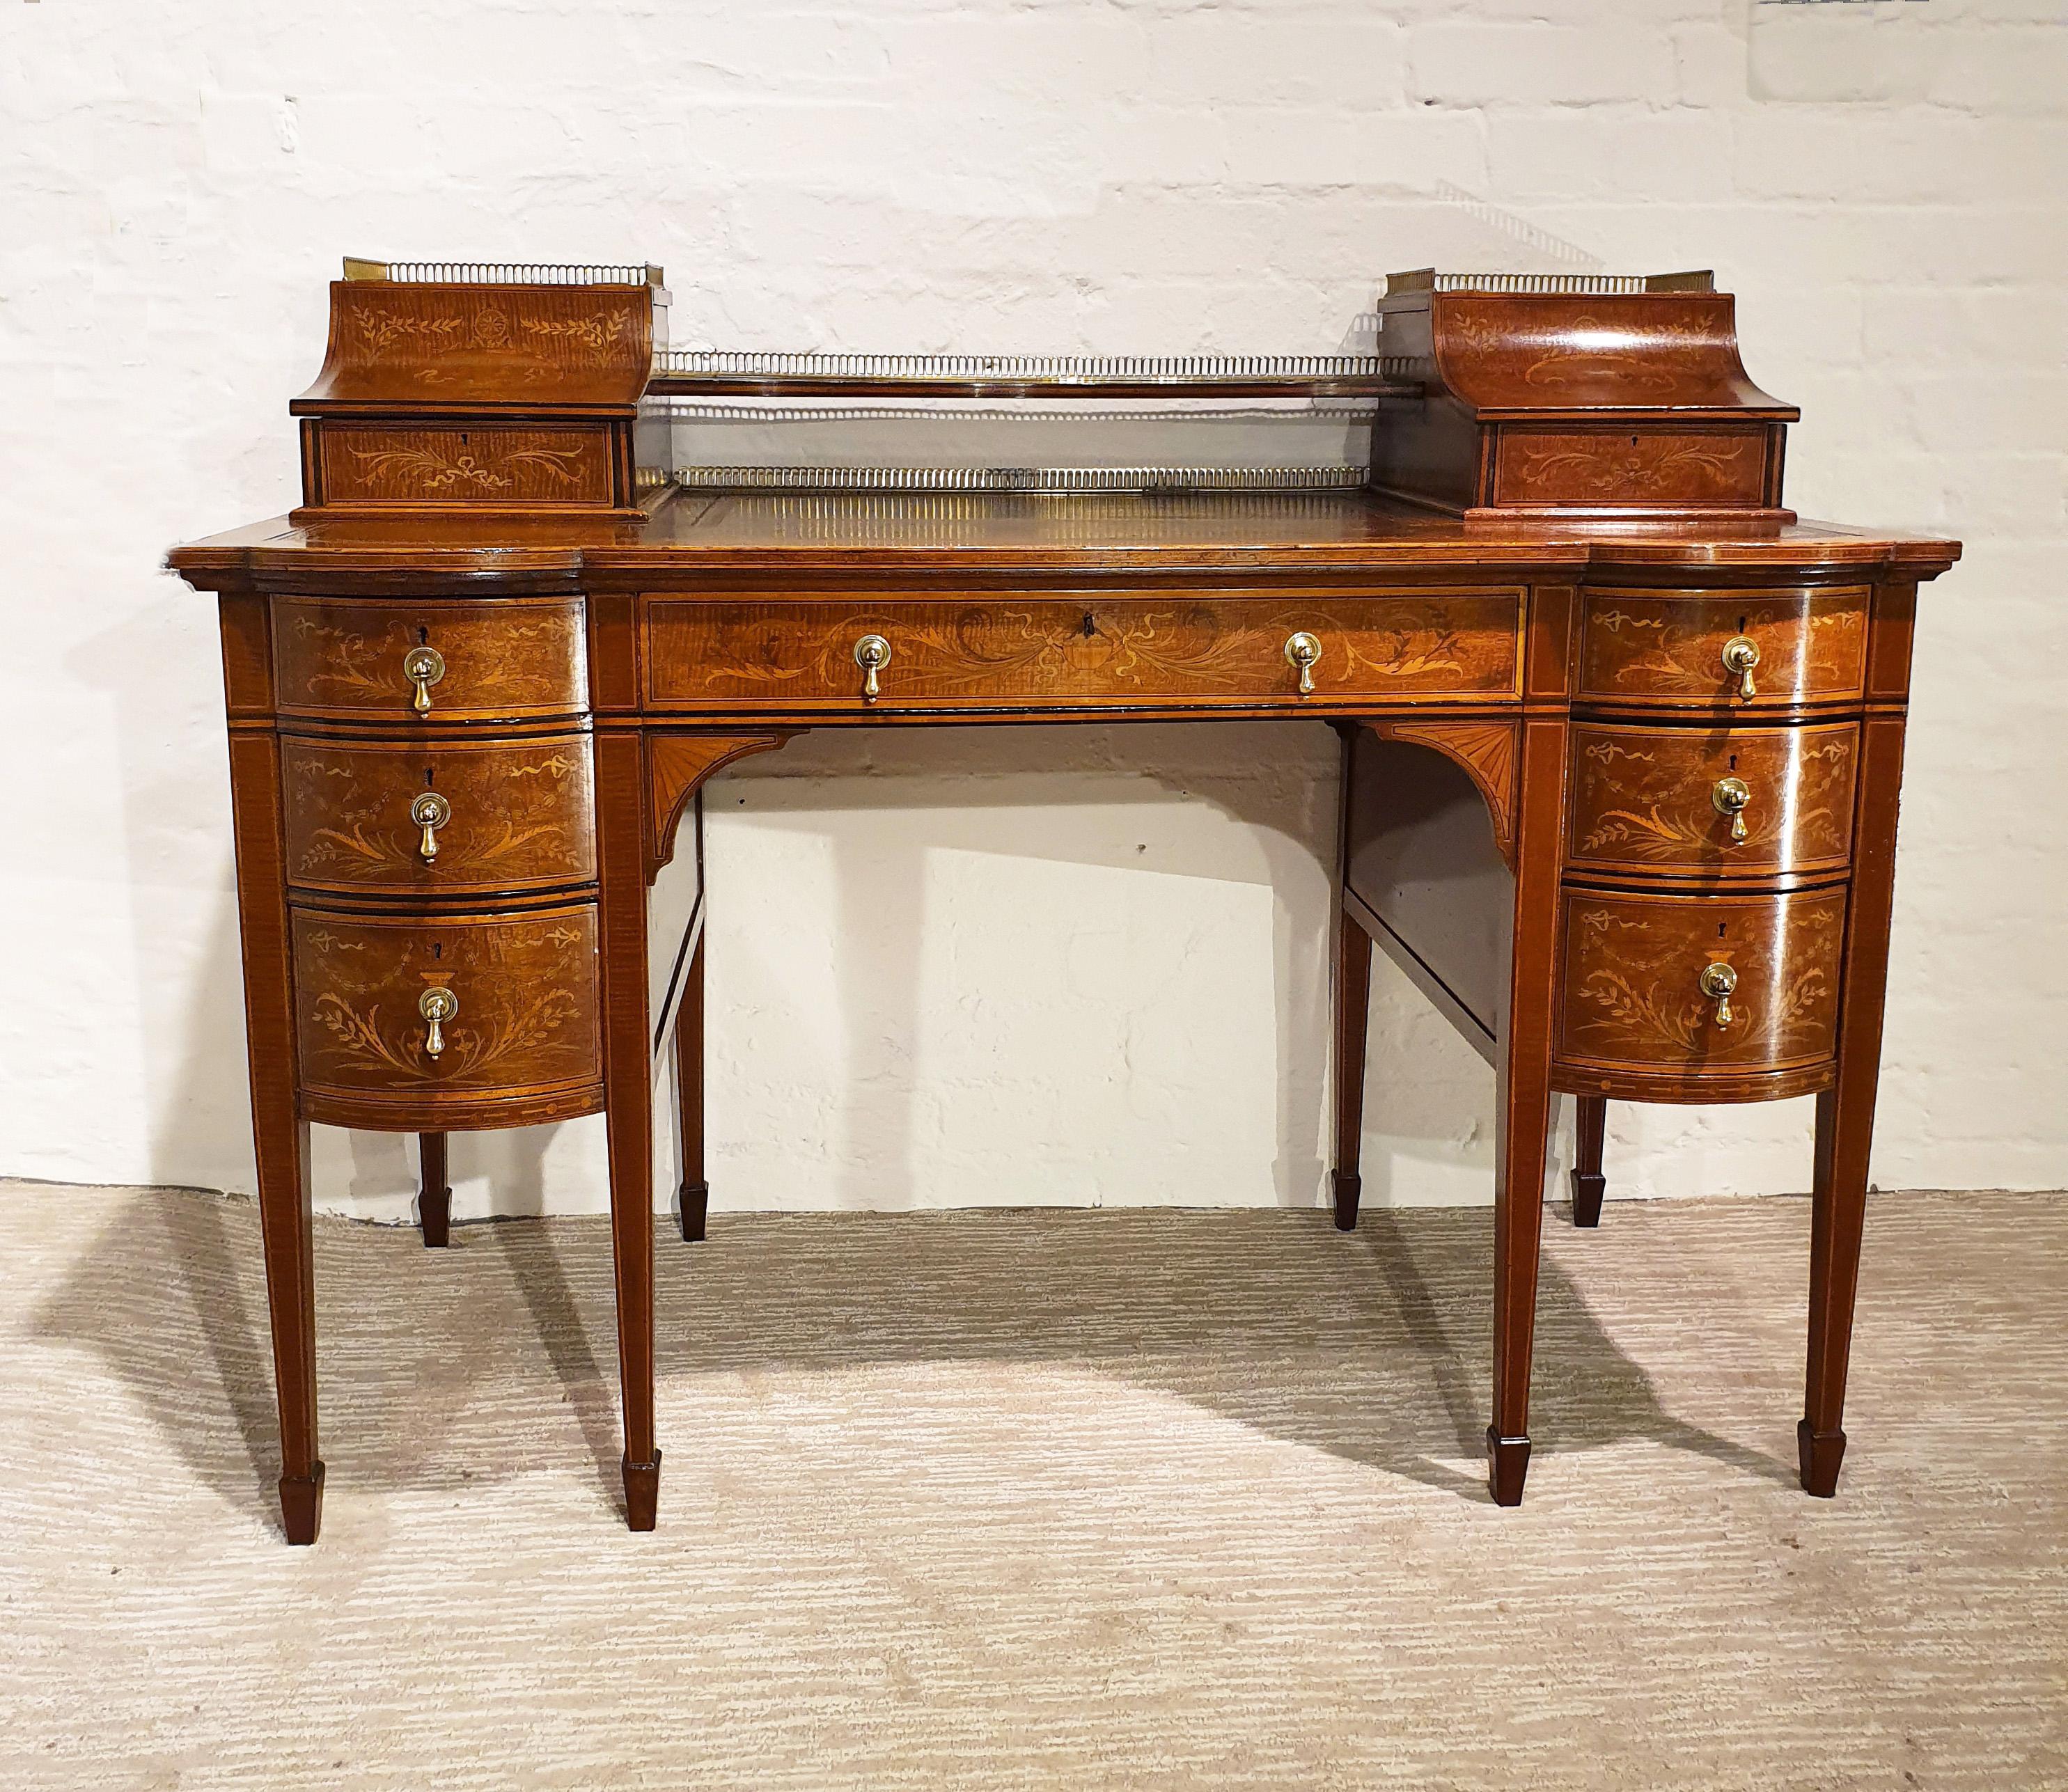 This good looking and very detailed early 20th century English mahogany writing desk is a Sheraton Revival desk, inlaid with ornate satinwood detailing of scrolls, bows and ferns as well as stringing detail along the squared tapered legs. The desk